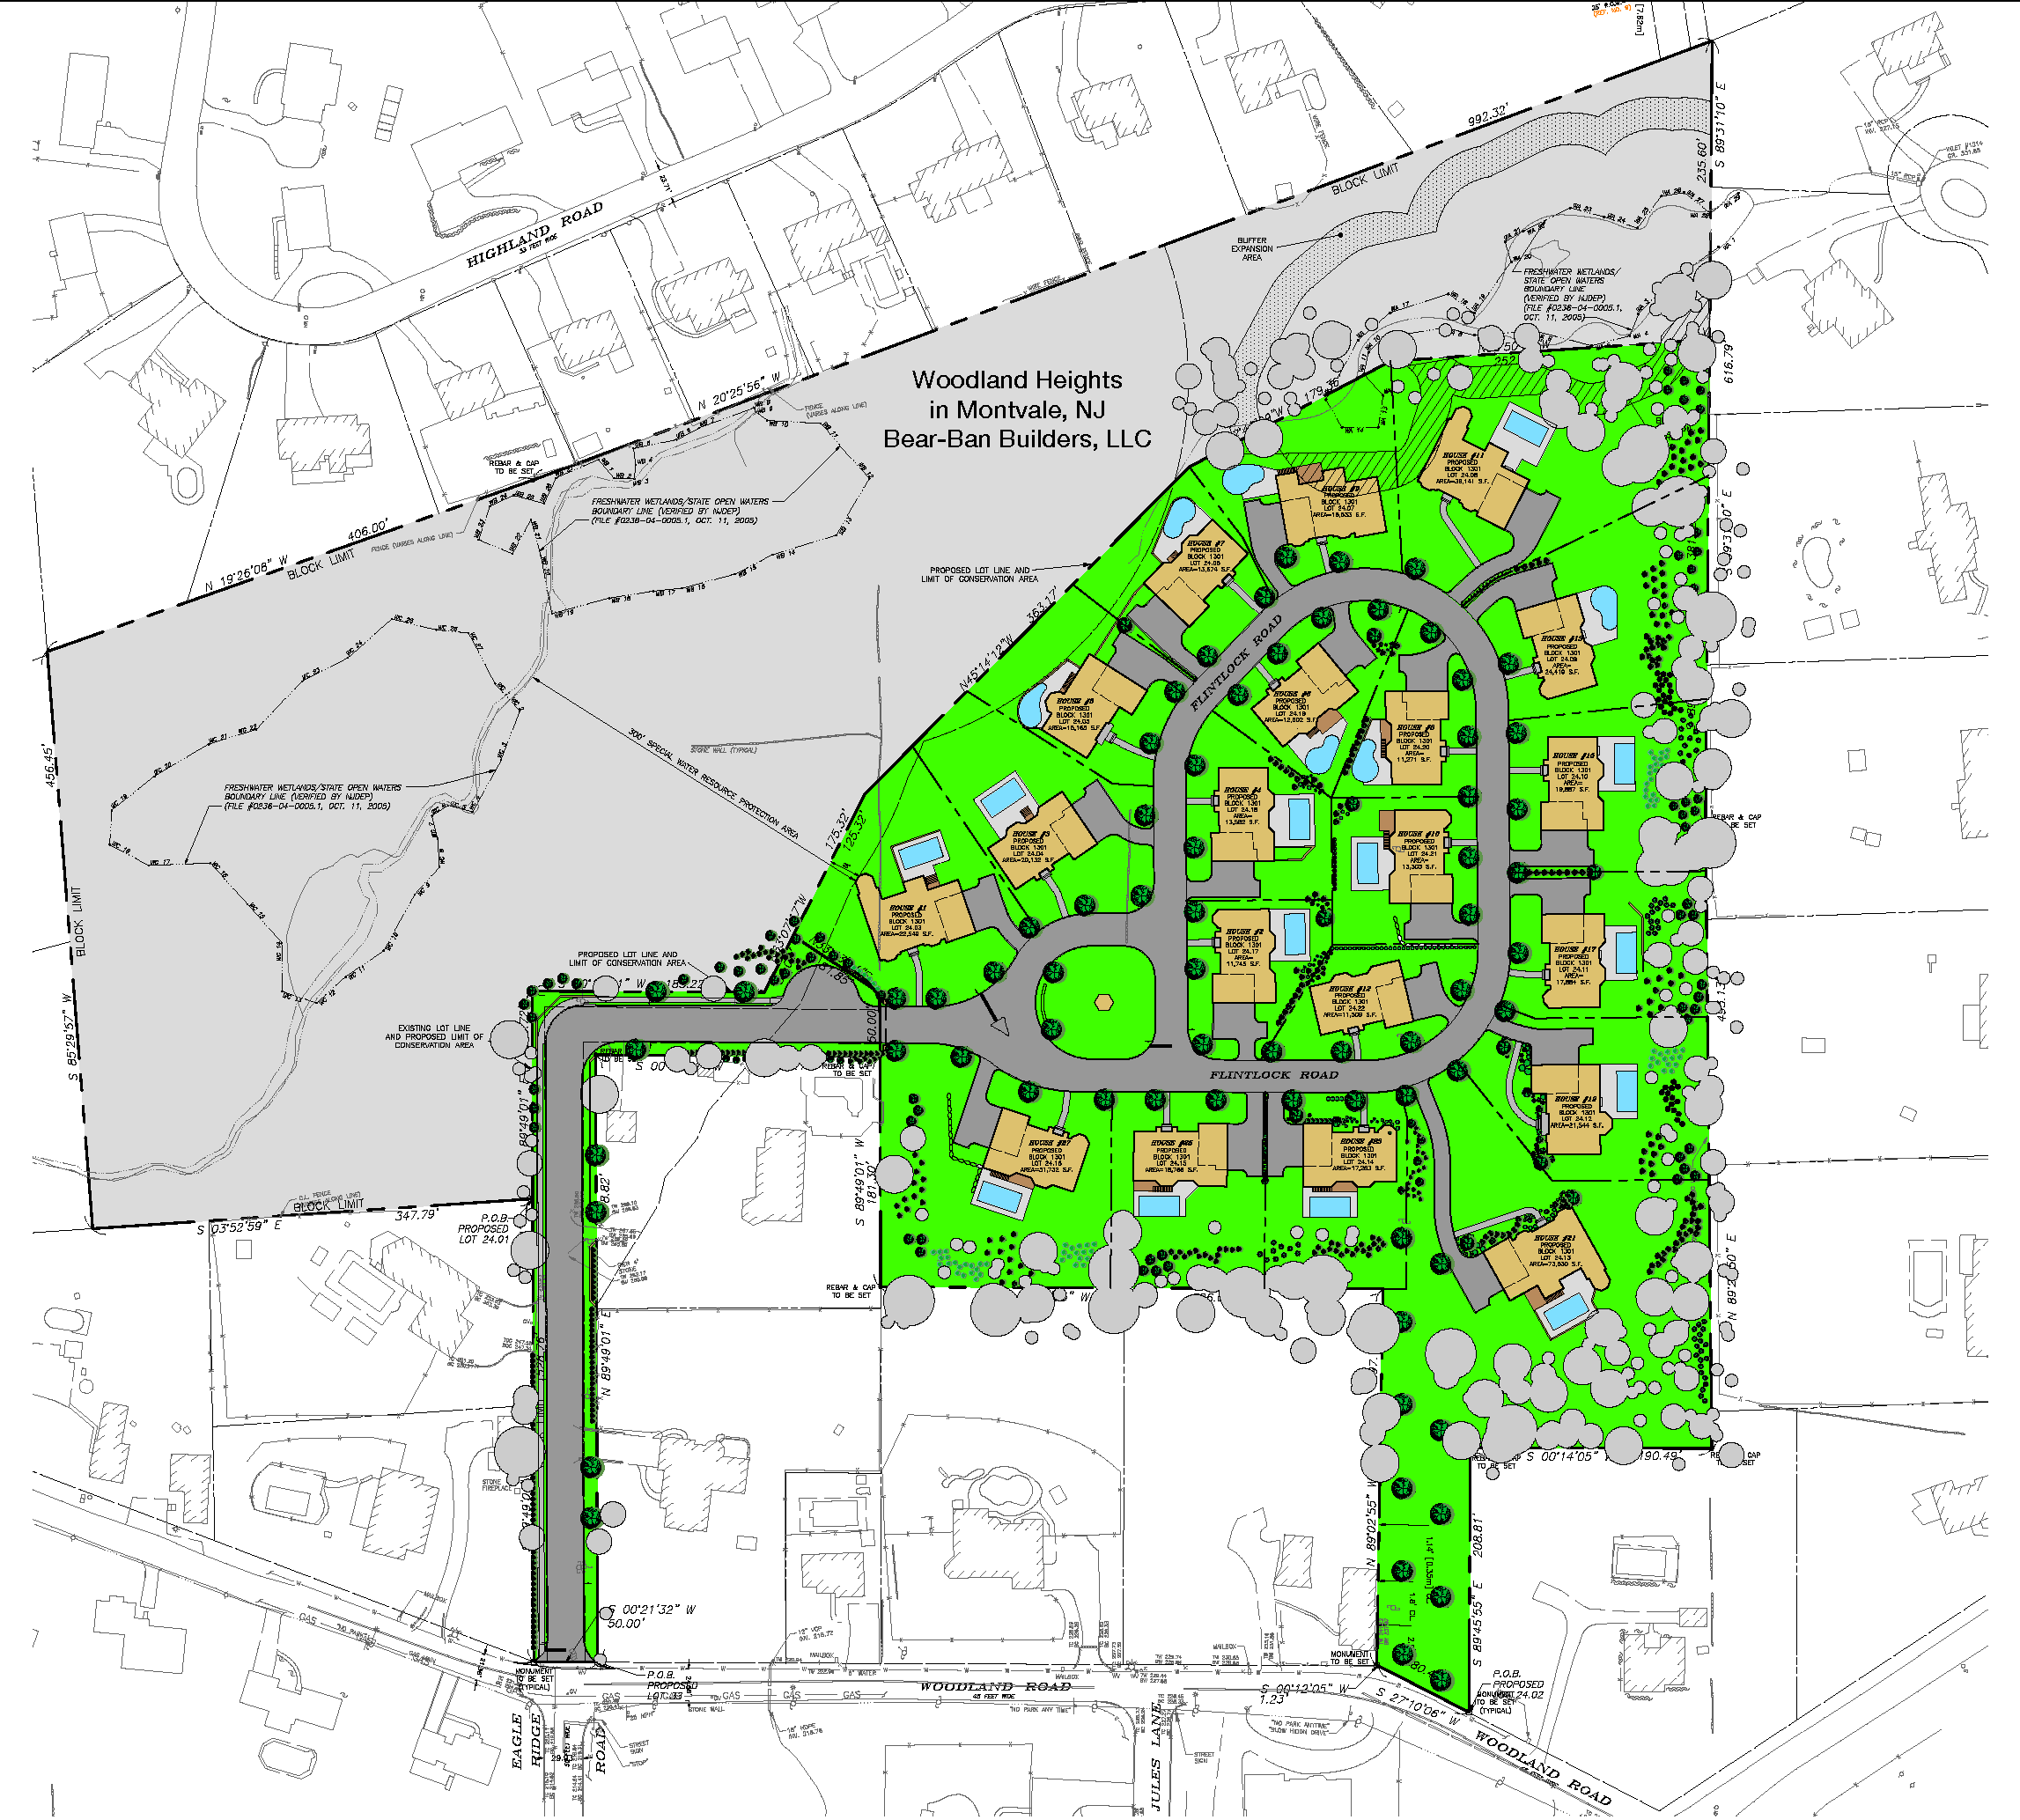 Site Layout of Woodland Heights Development in Montvale, NJ by Bear-Ban Builders, LLC